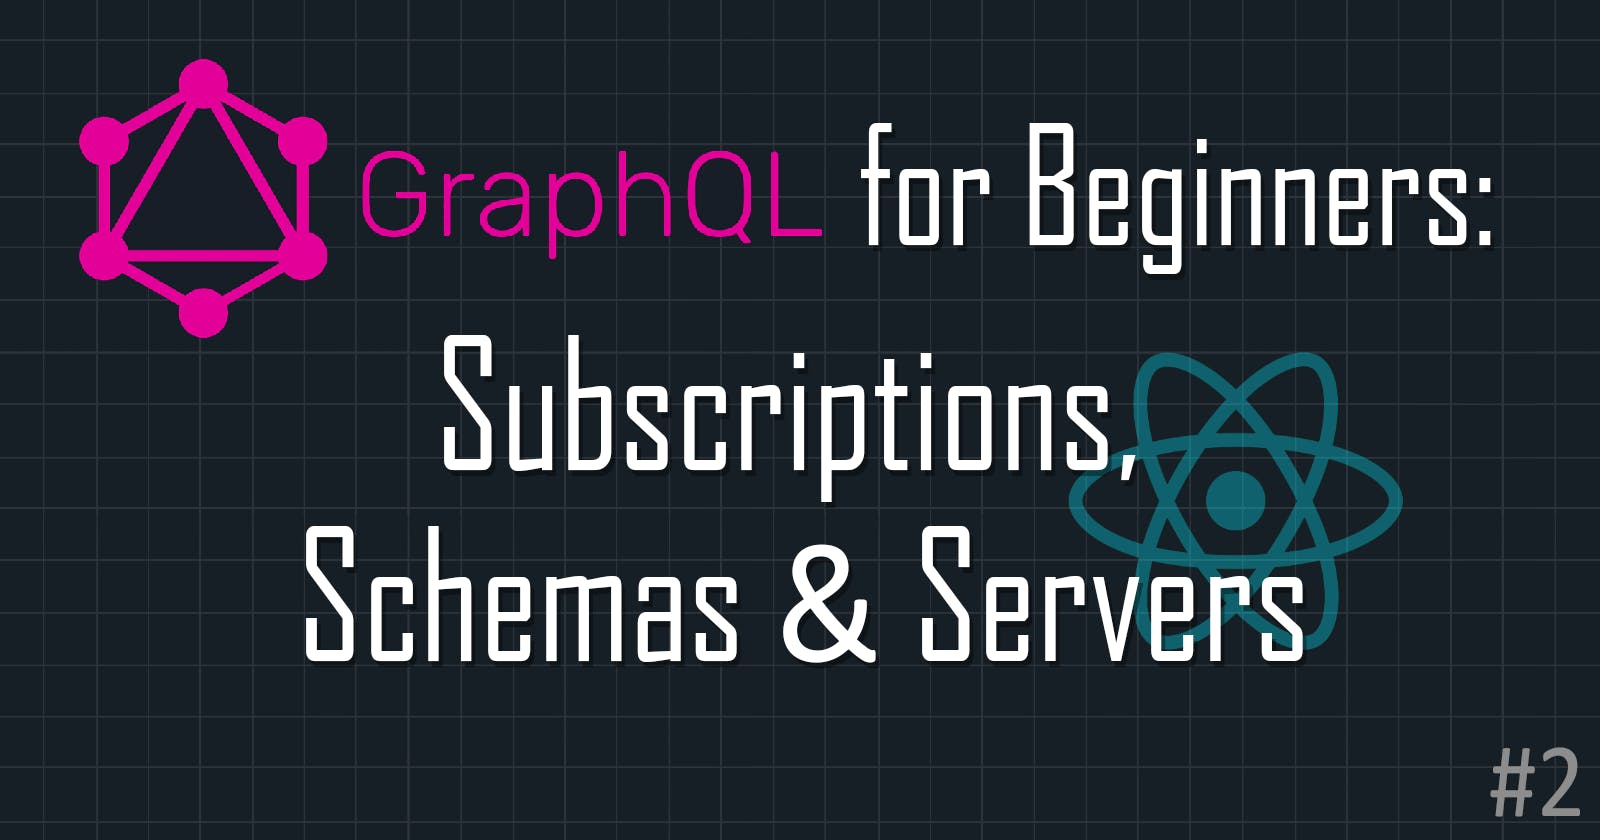 GraphQL for Beginners: Subscriptions, Schemas and Servers